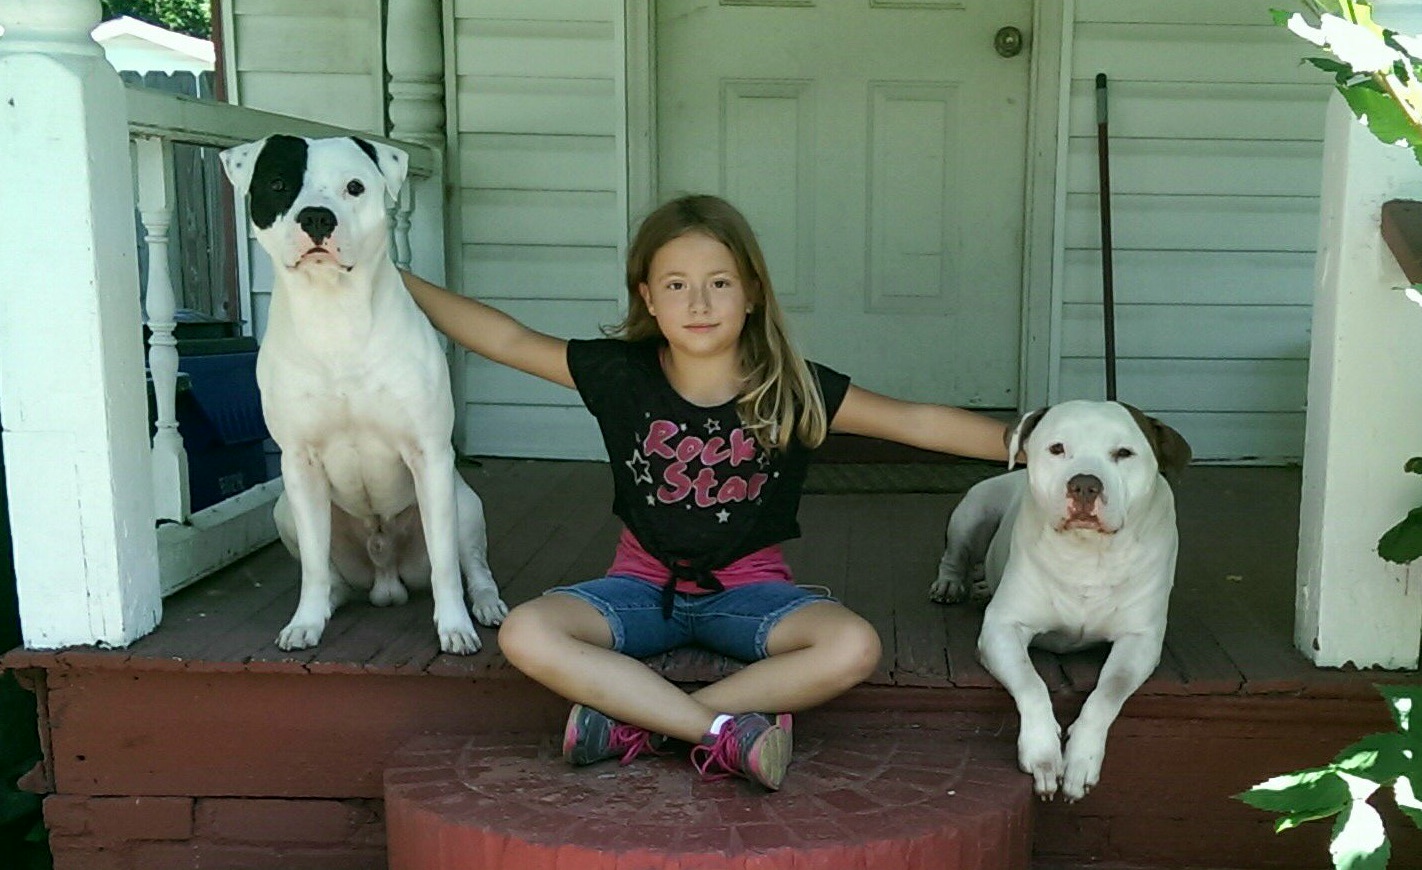 My daughters Guardians / Big Brothers